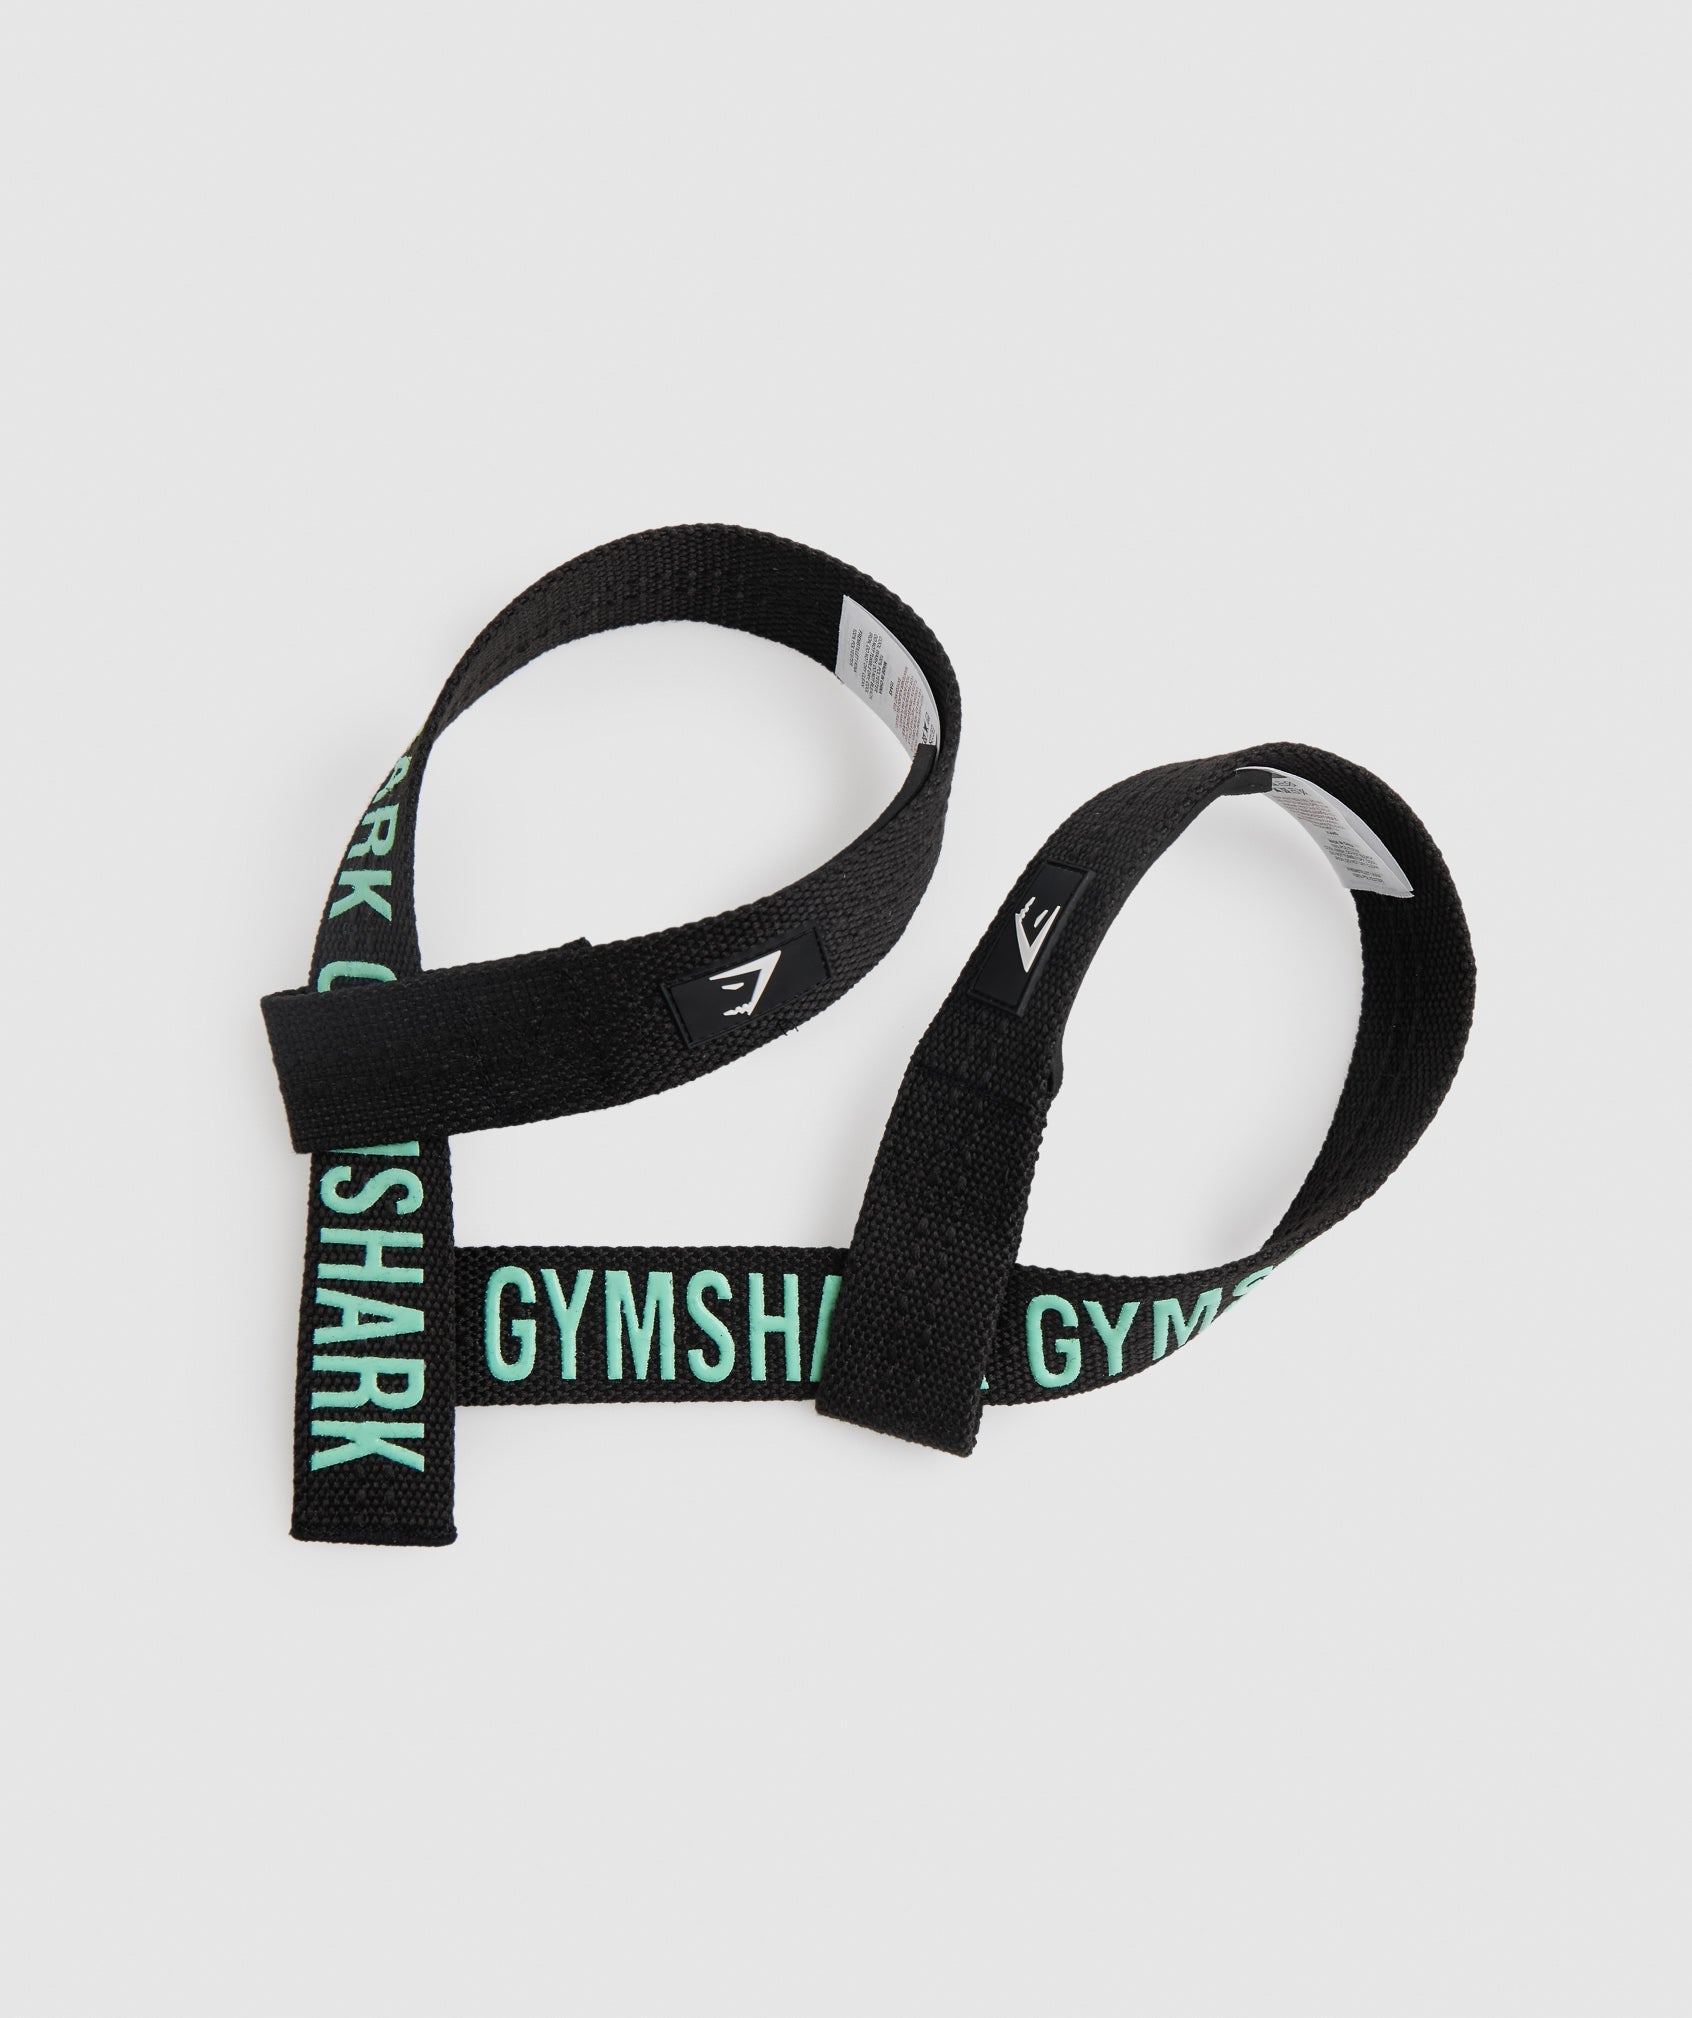 Gymshark Silicone Lifting Straps - Black/Blue – Client 446 100K products